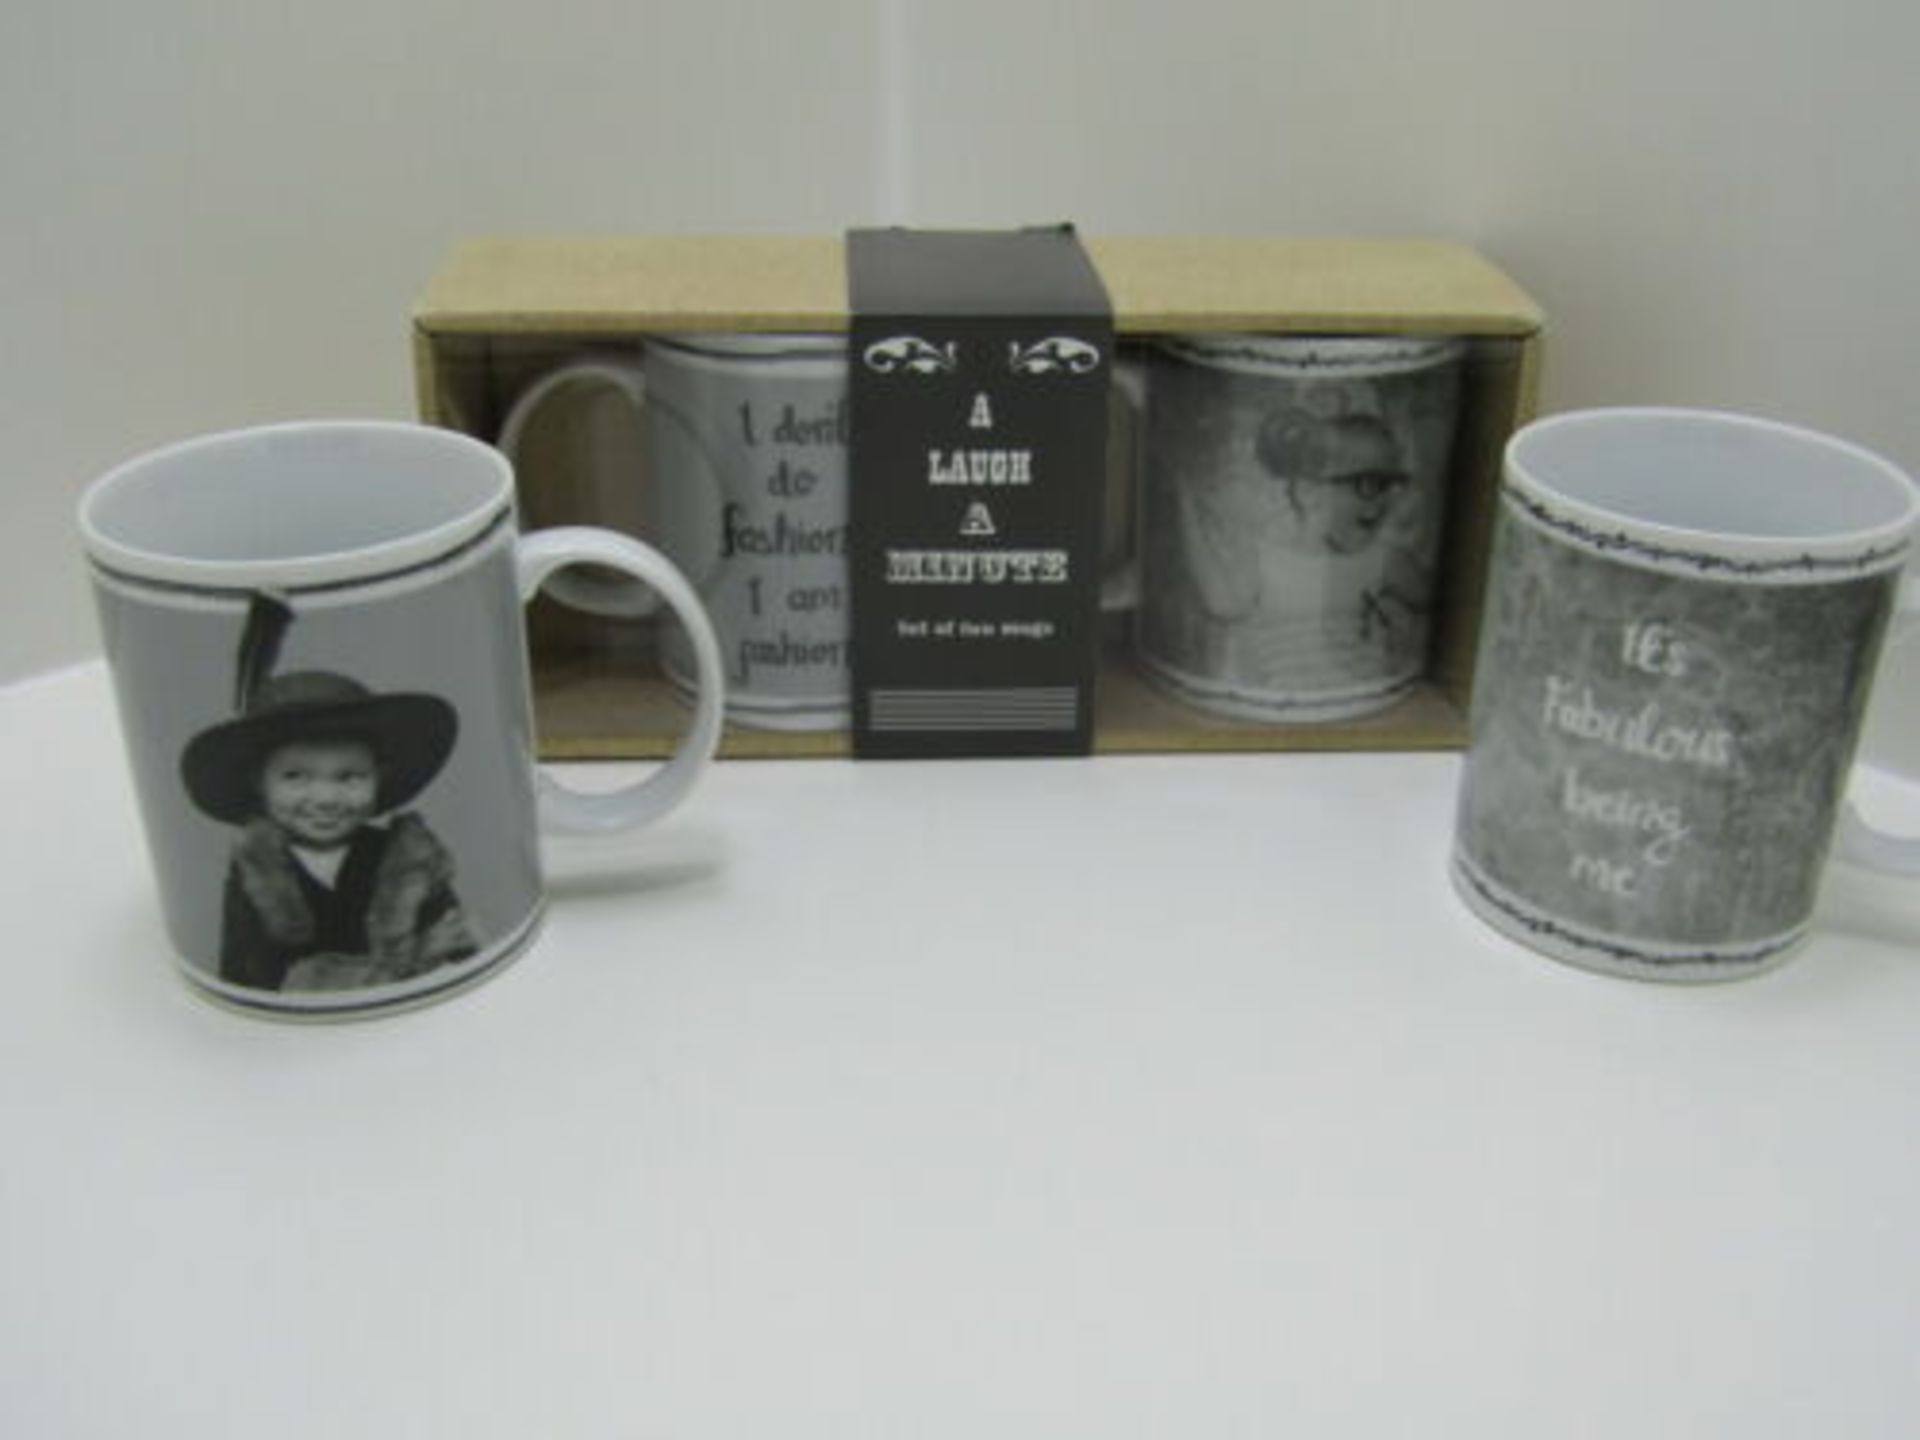 20 x Novelty Mugs. Gift Boxed. Coffe Mugs. Large 11oz Volume. no vat on hammer.You will get 20 - Image 2 of 7